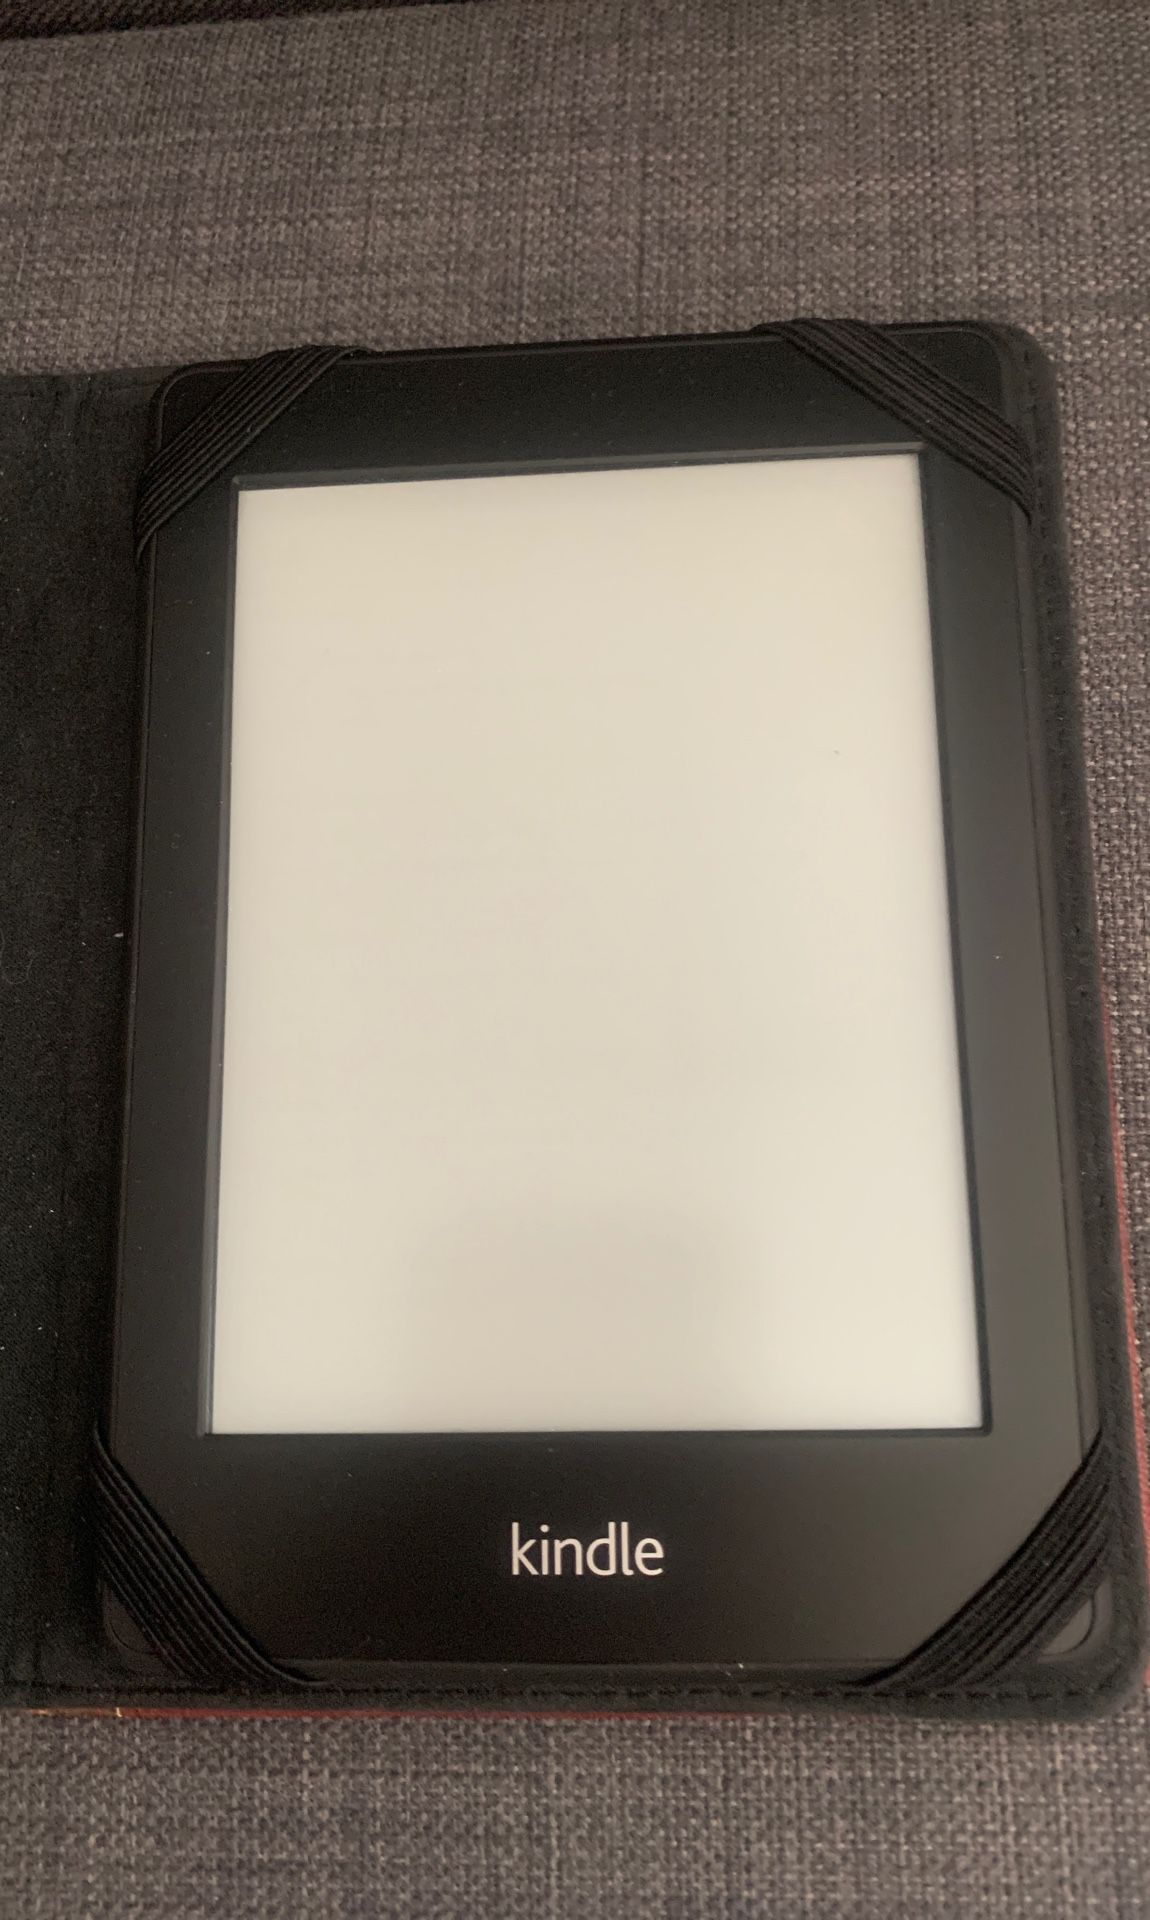 Kindle paper white with case and cord